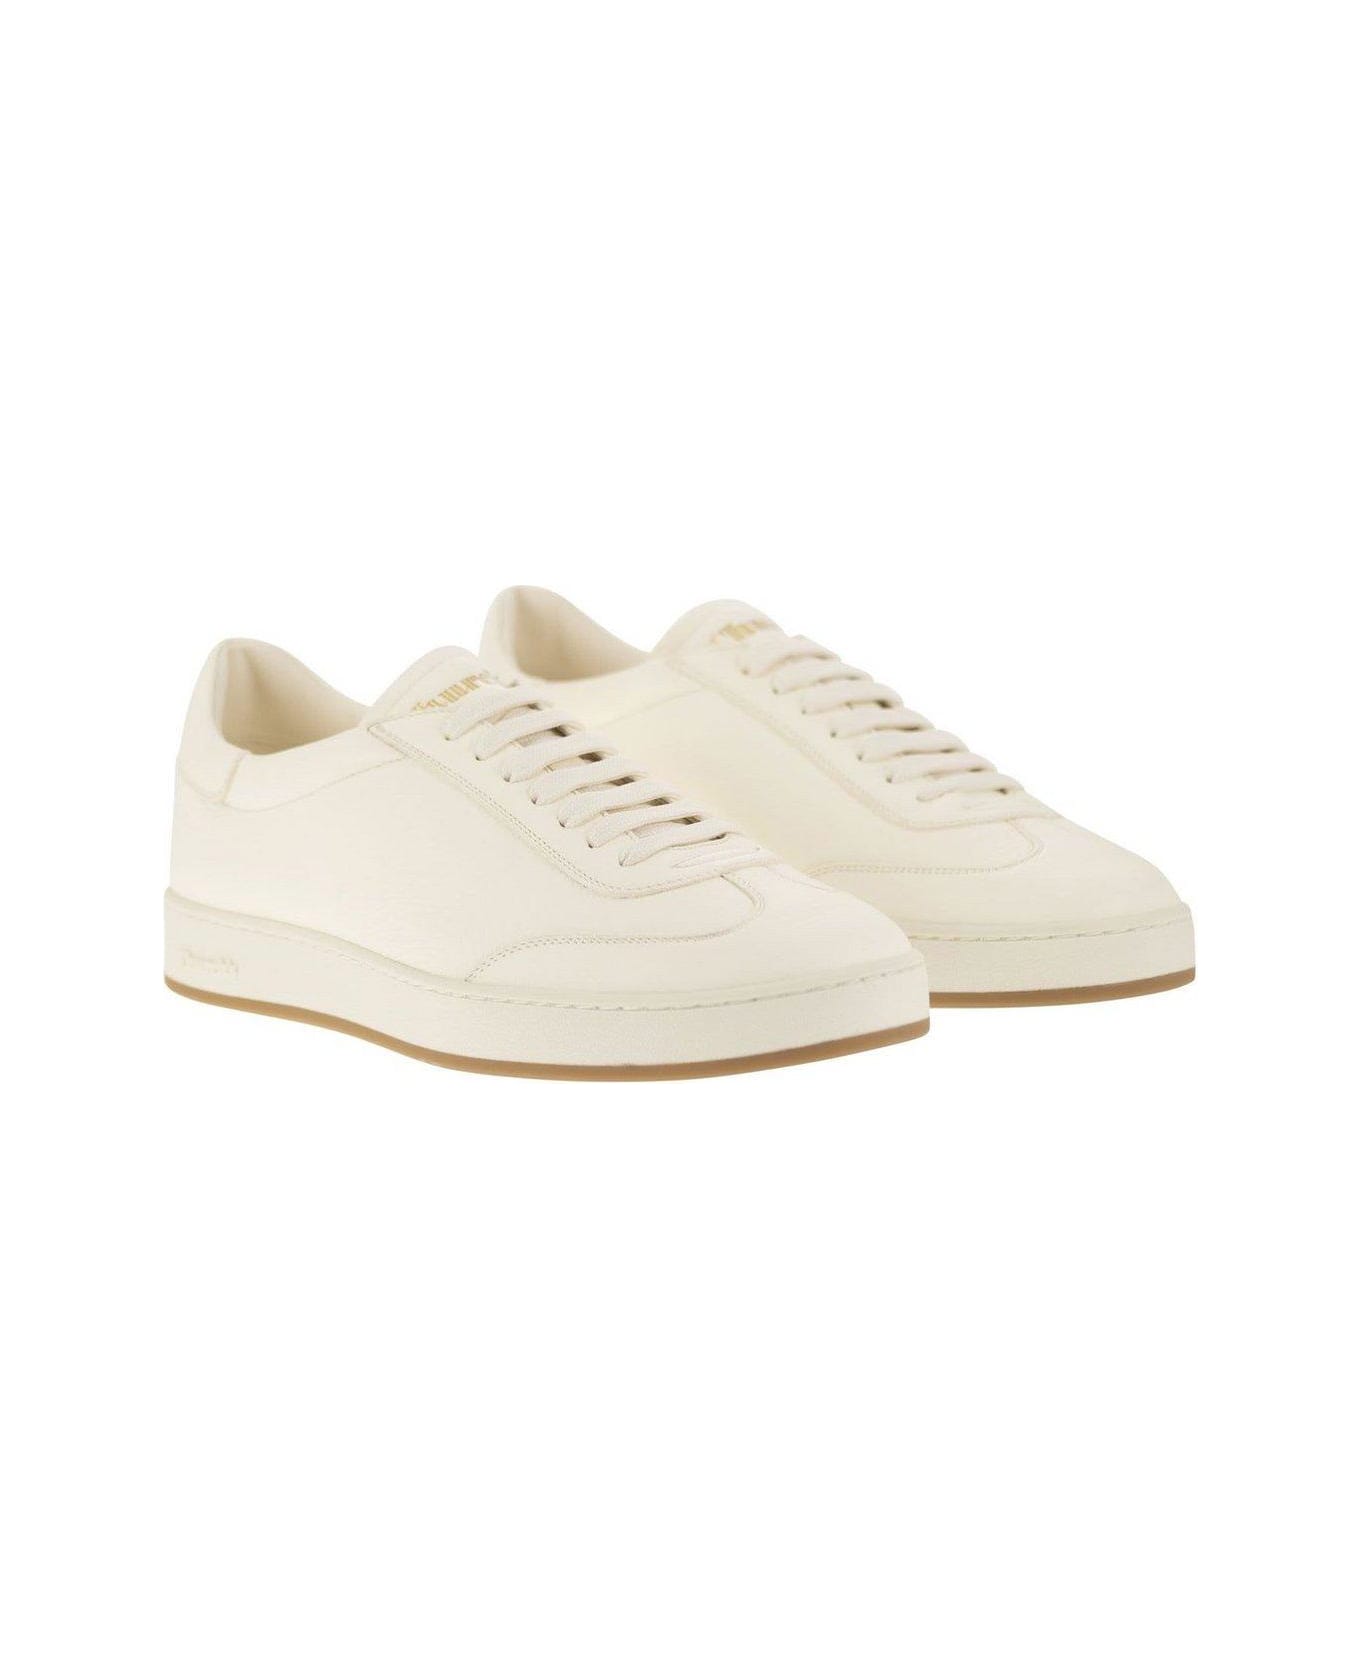 Church's Logo Printed Lace-up Sneakers - Ivory